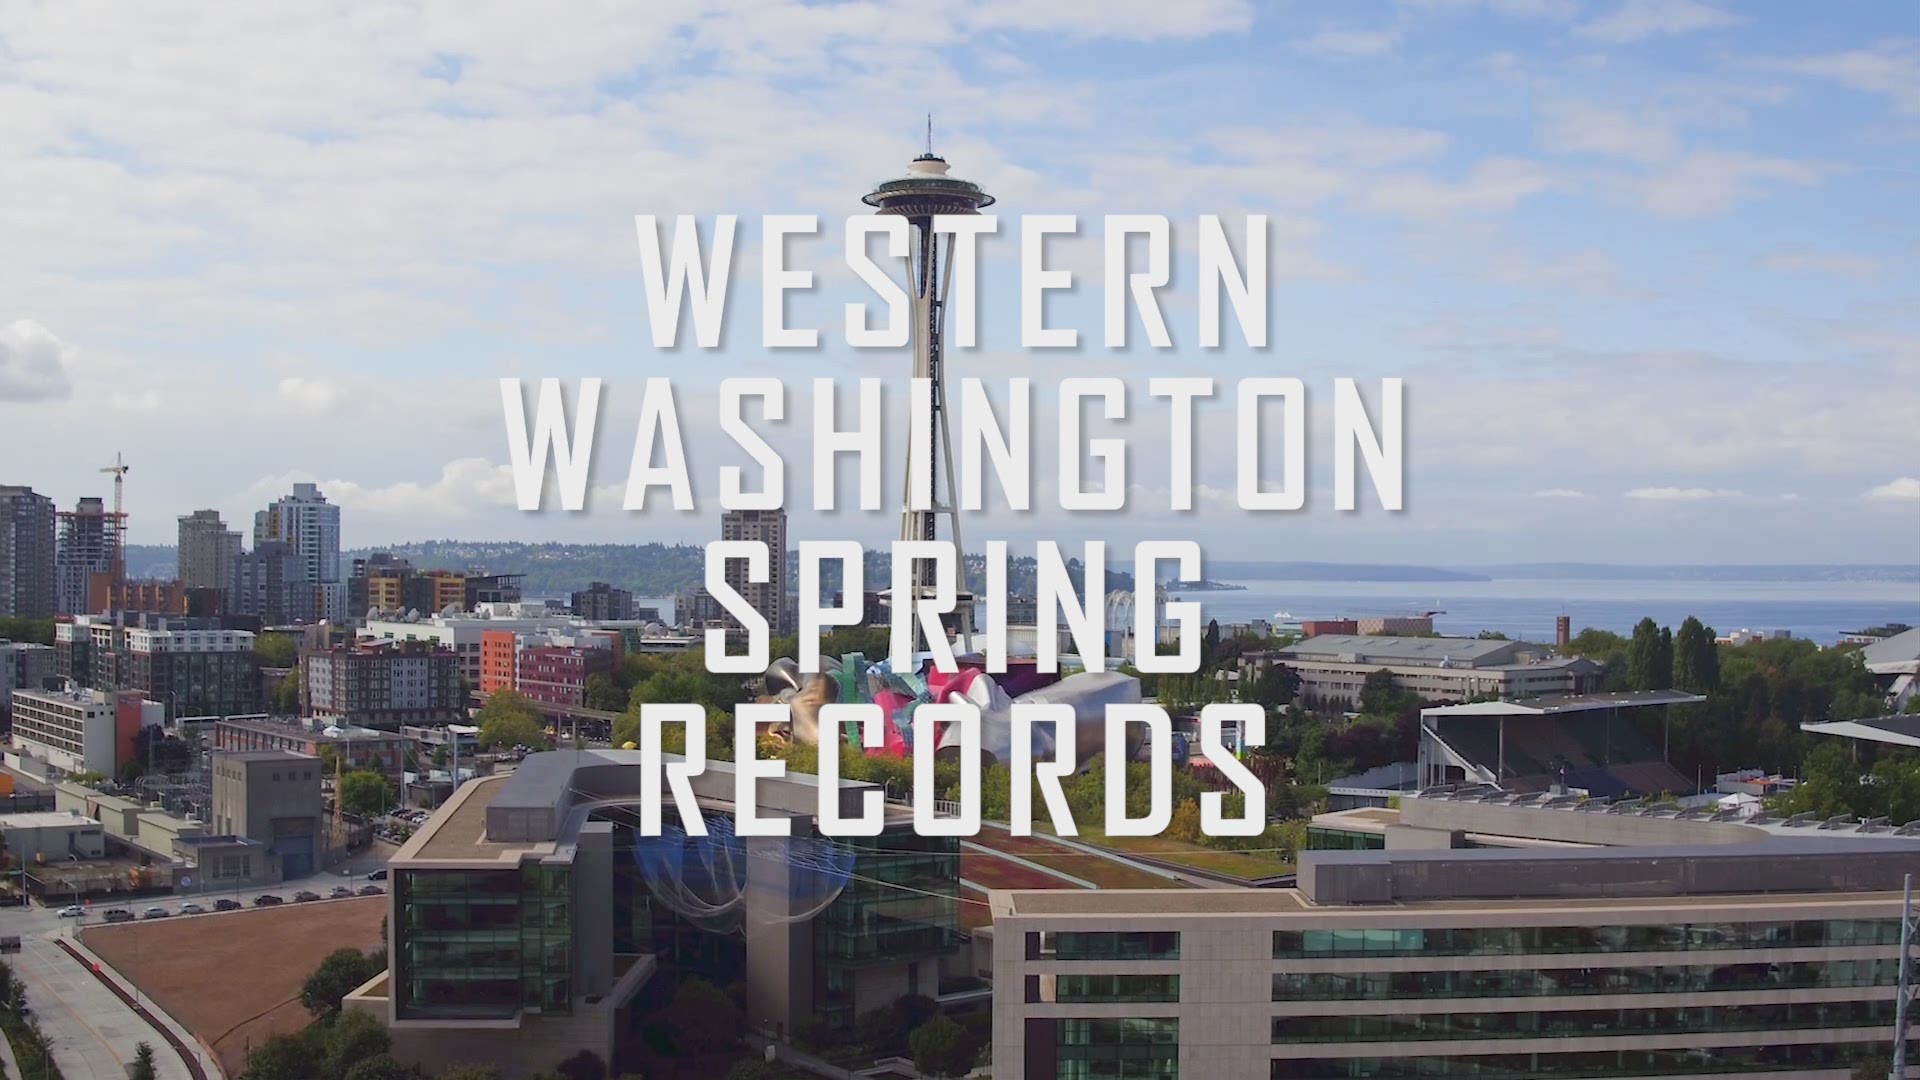 See the all-time weather records for the spring season in western Washington.